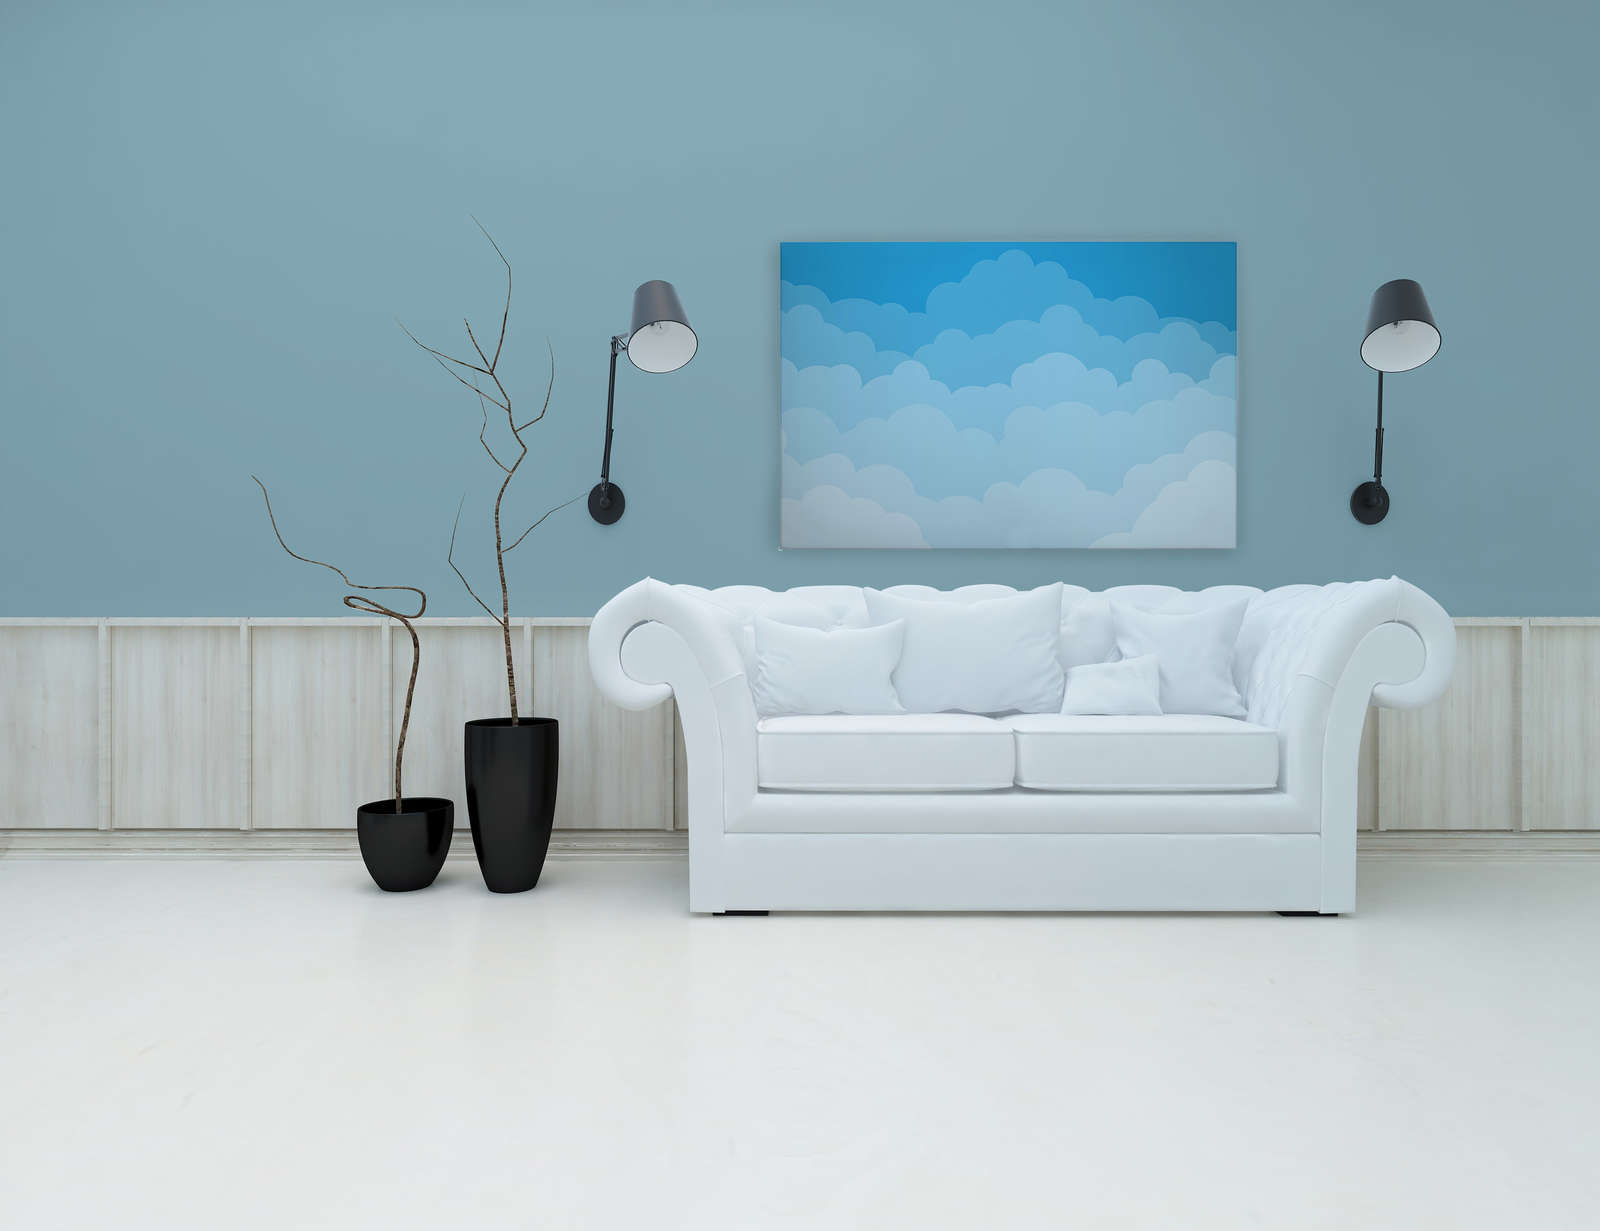             Canvas Sky with Clouds in Comic Style - 120 cm x 80 cm
        